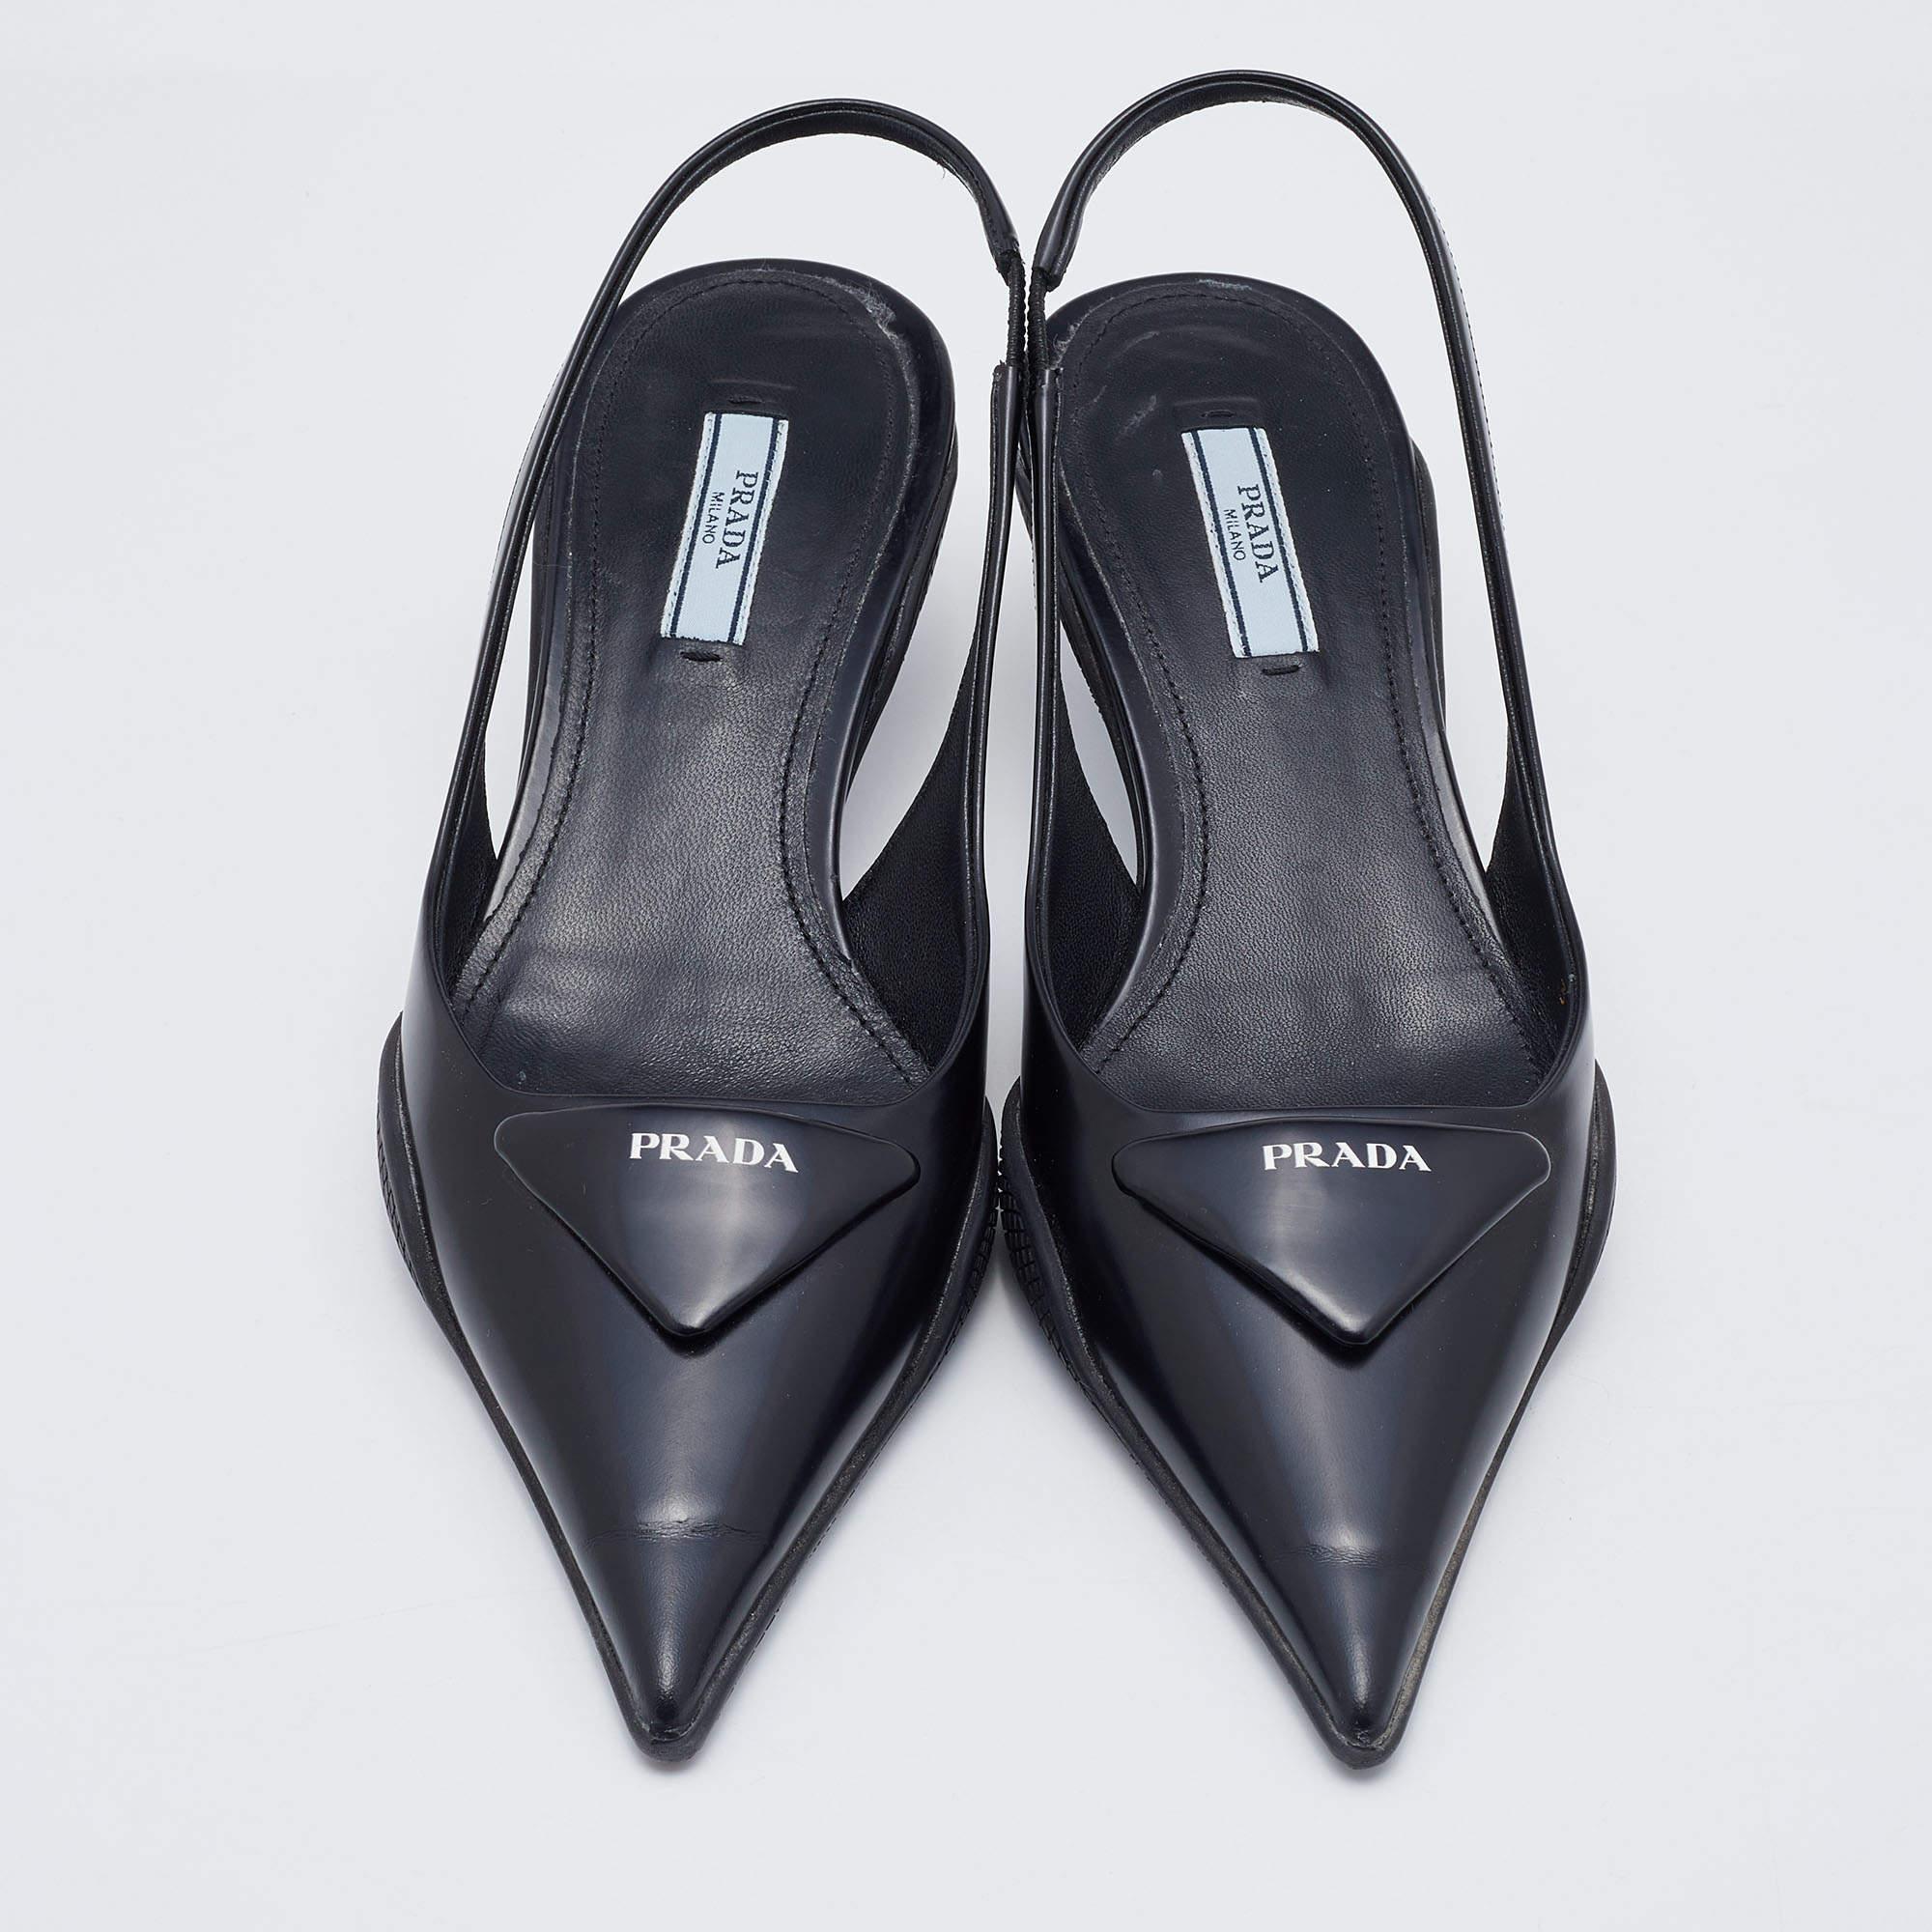 Exhibit an elegant style with this pair of pumps. These designer pumps are crafted from quality materials. They are set on durable soles and low heels.

Includes
Original Dustbag, Original Box, Extra Heel Tips, Info Booklet